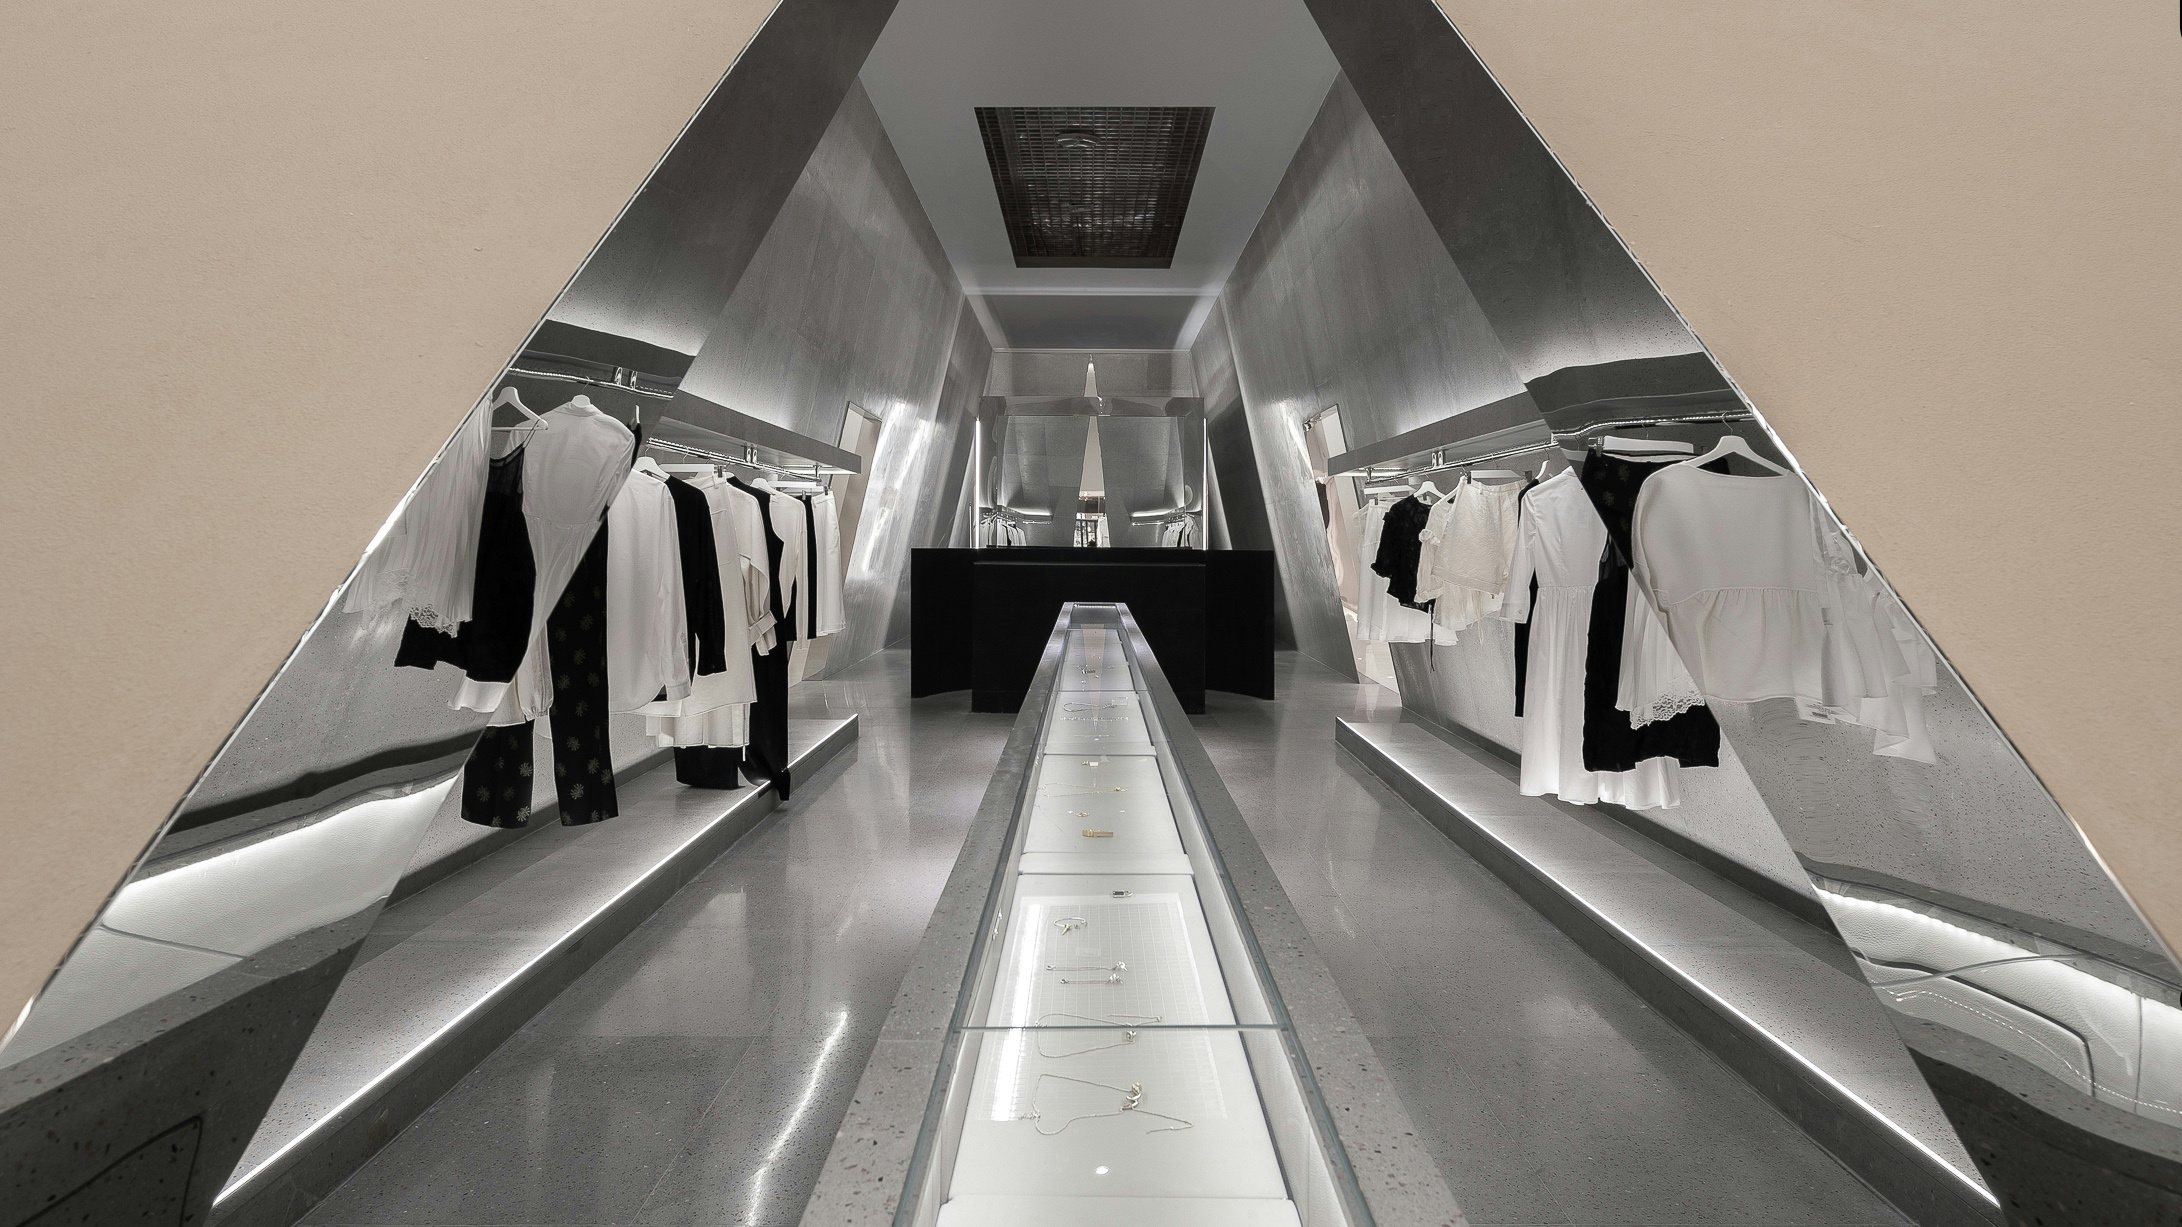 After the COVID-19 pandemic, the luxury landscape in China quickly became more advanced, and local independent multi-brand stores have taken advantage. Photo: SND boutique. Credit: Various Associates